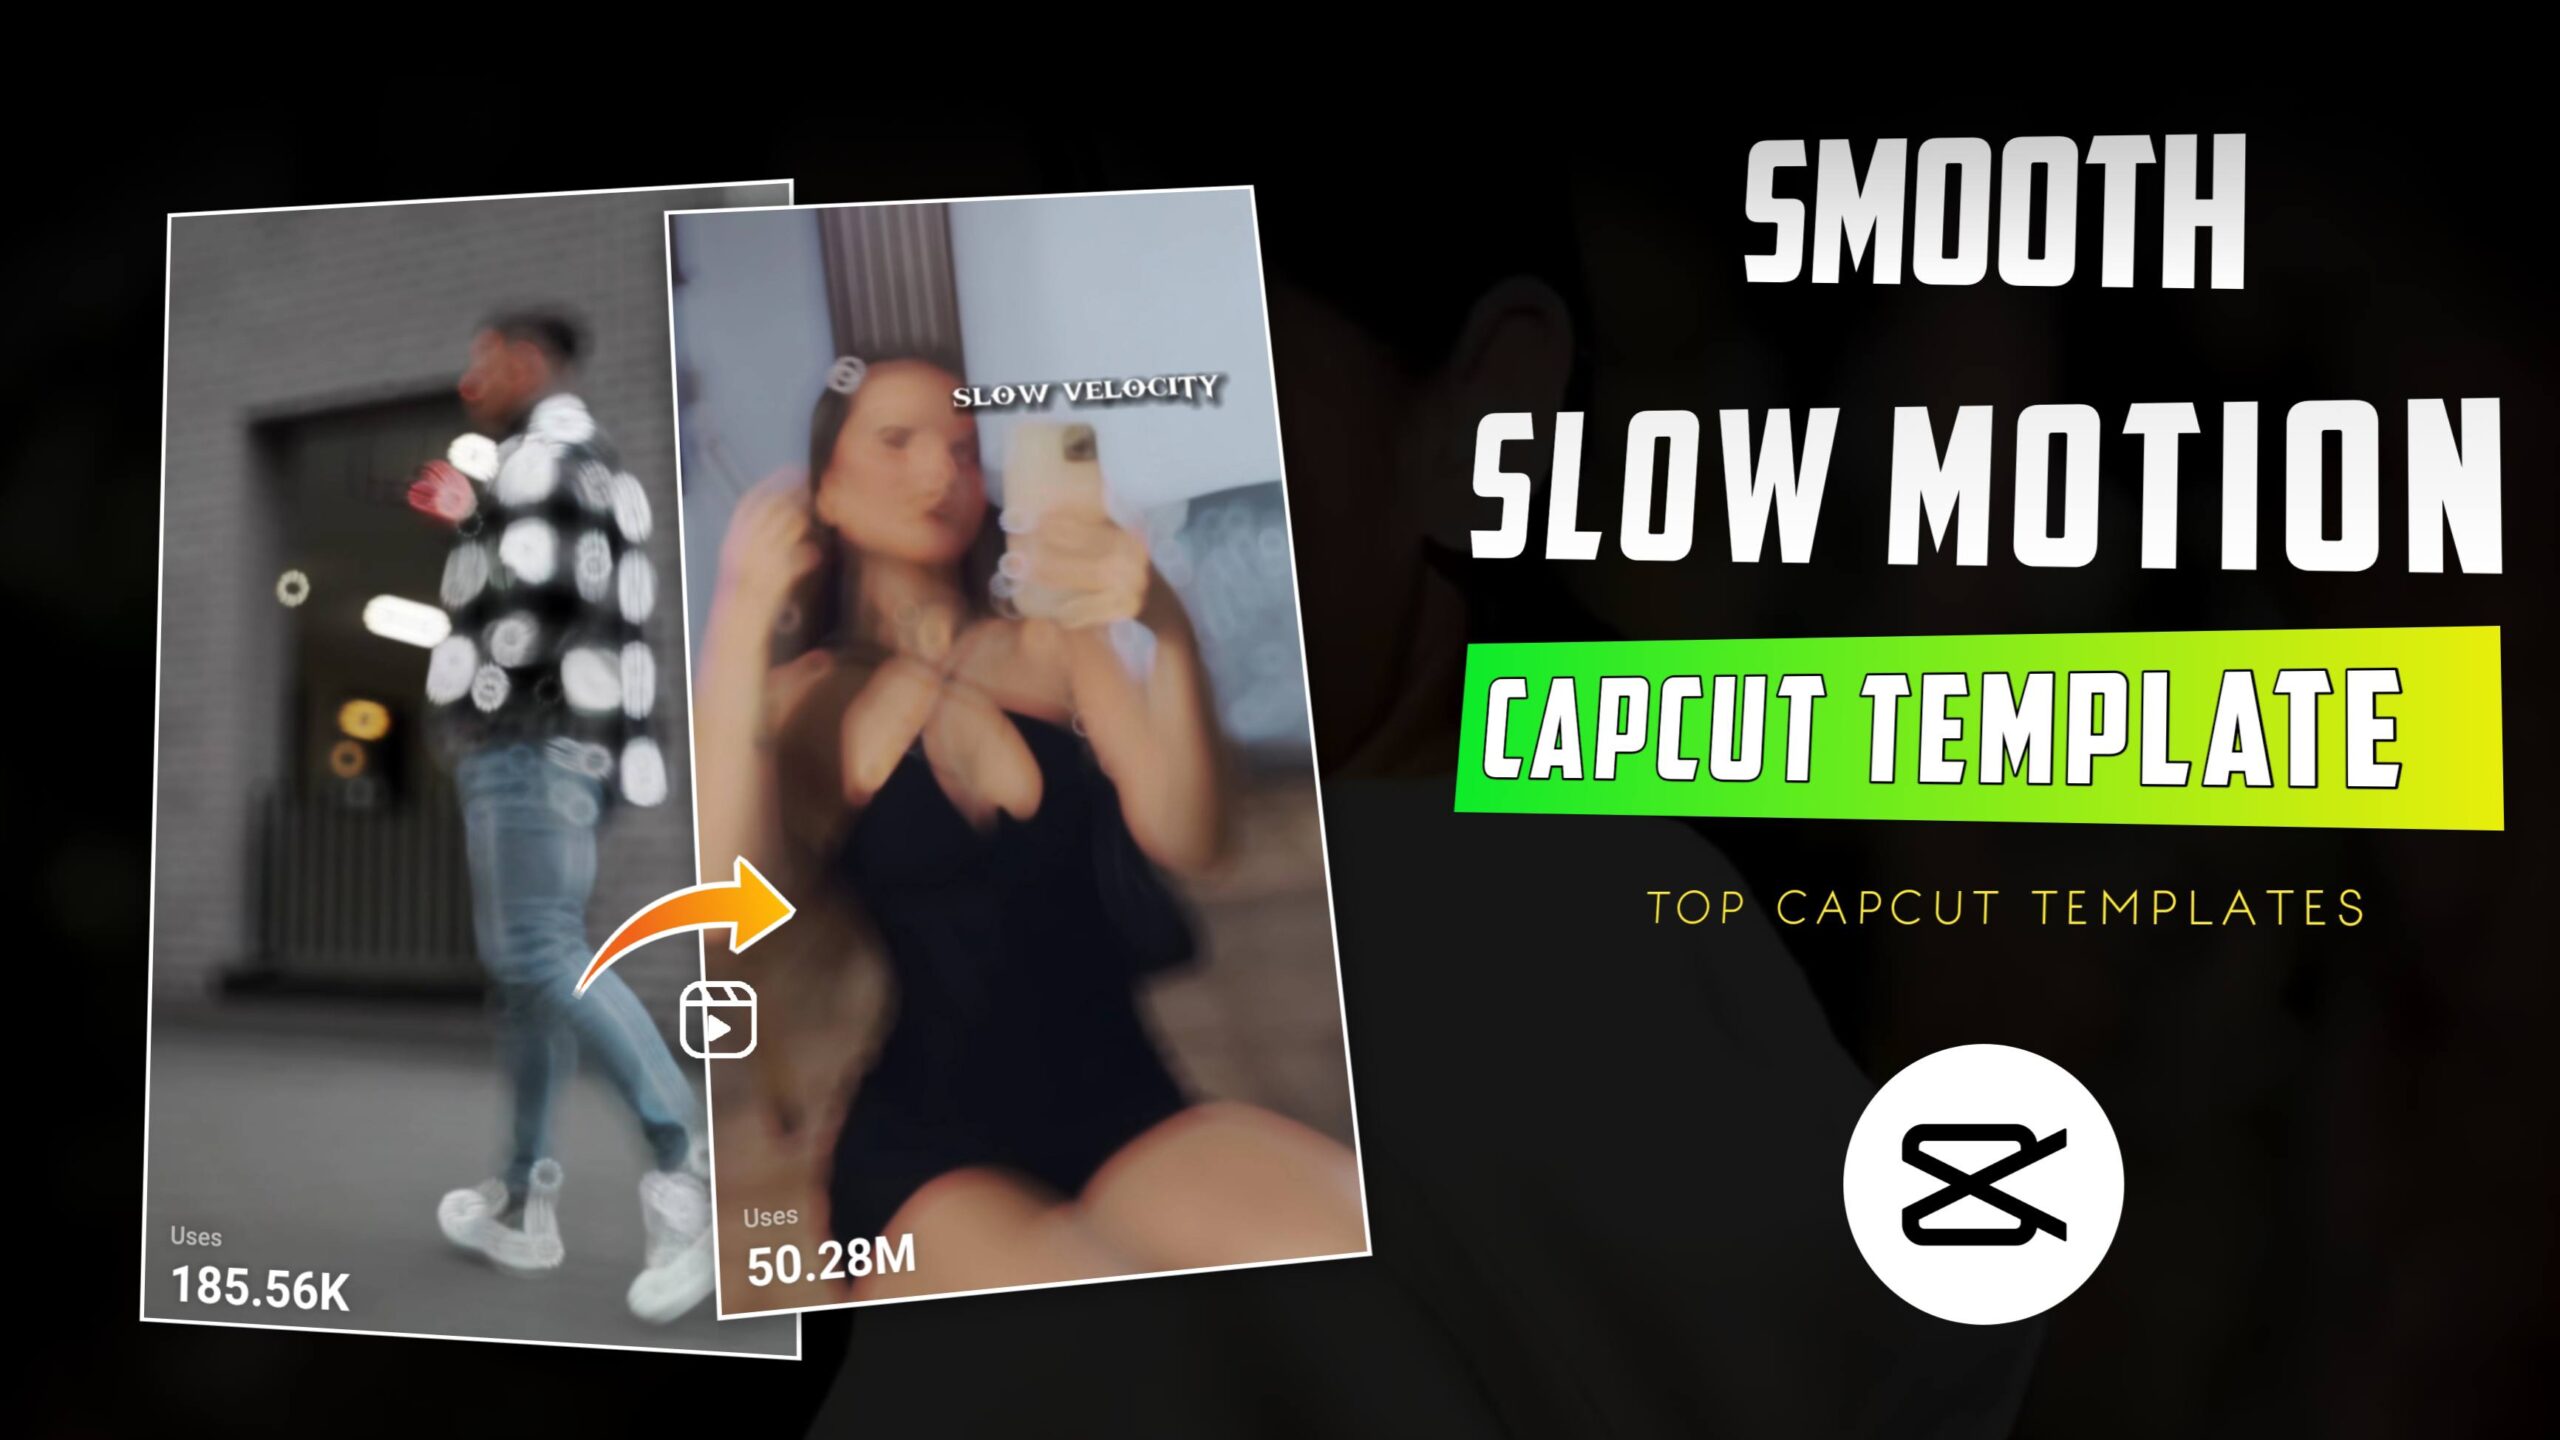 Smooth Slow Motion Capcut Template Links